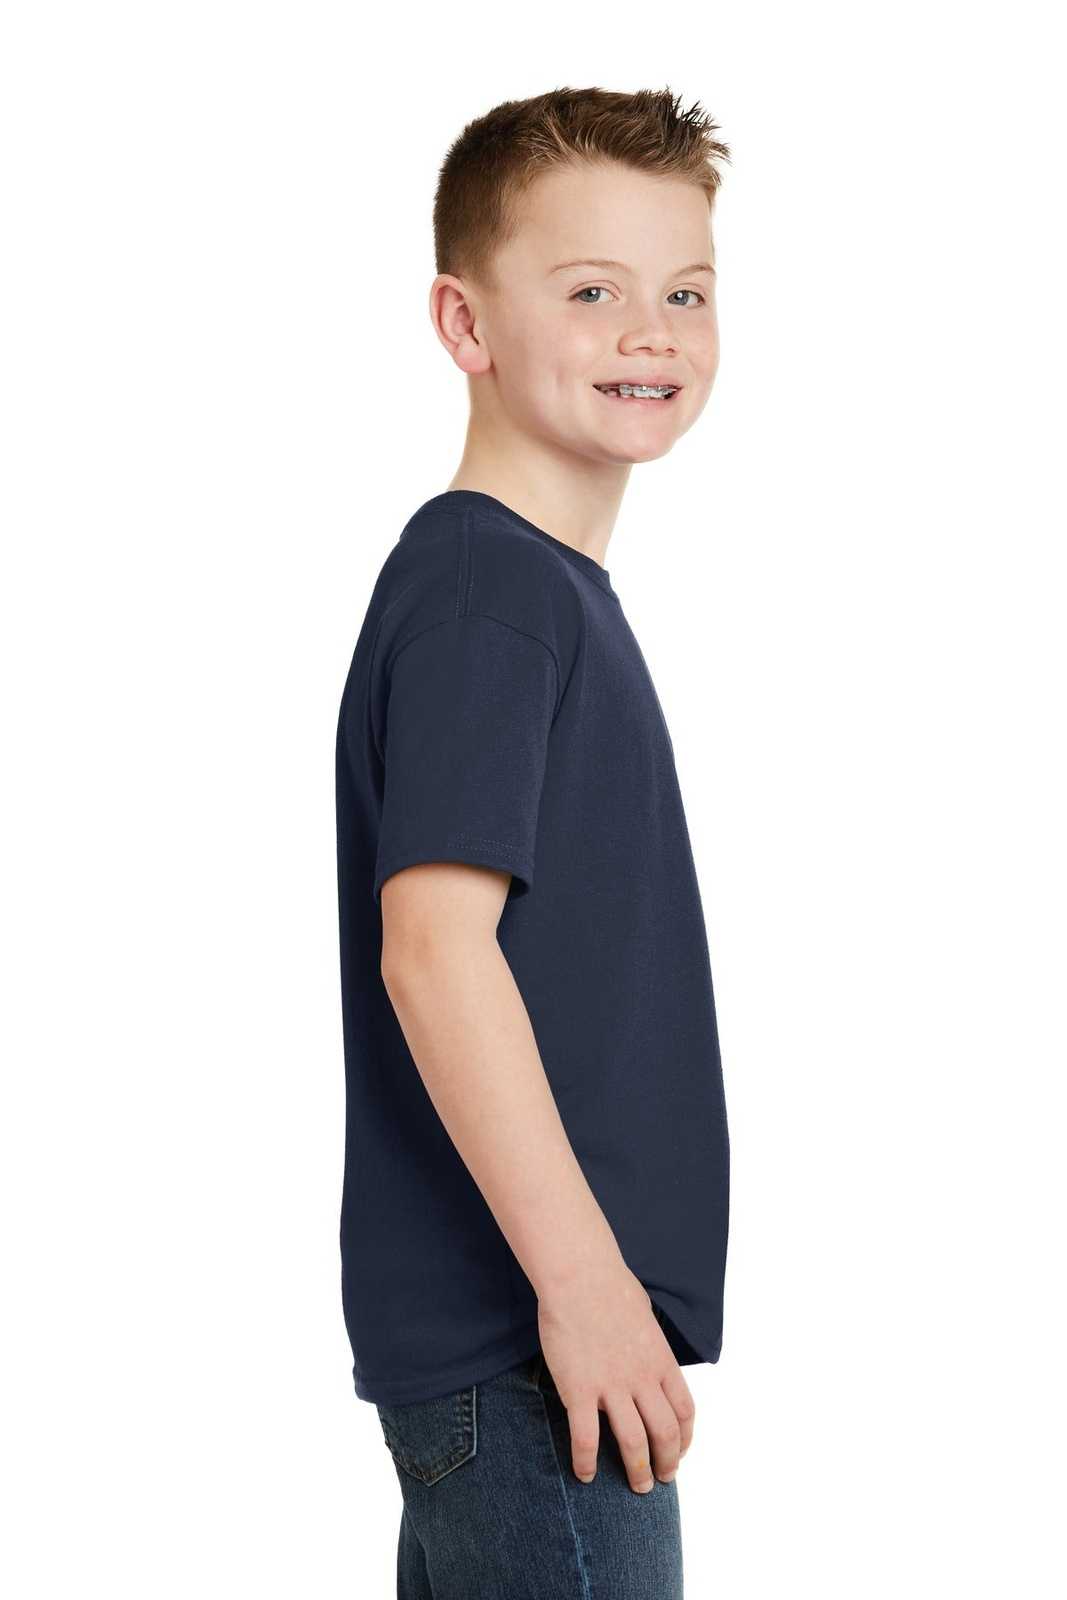 Hanes 5370 Youth Ecosmart 50/50 Cotton/Poly T-Shirt - Navy - HIT a Double